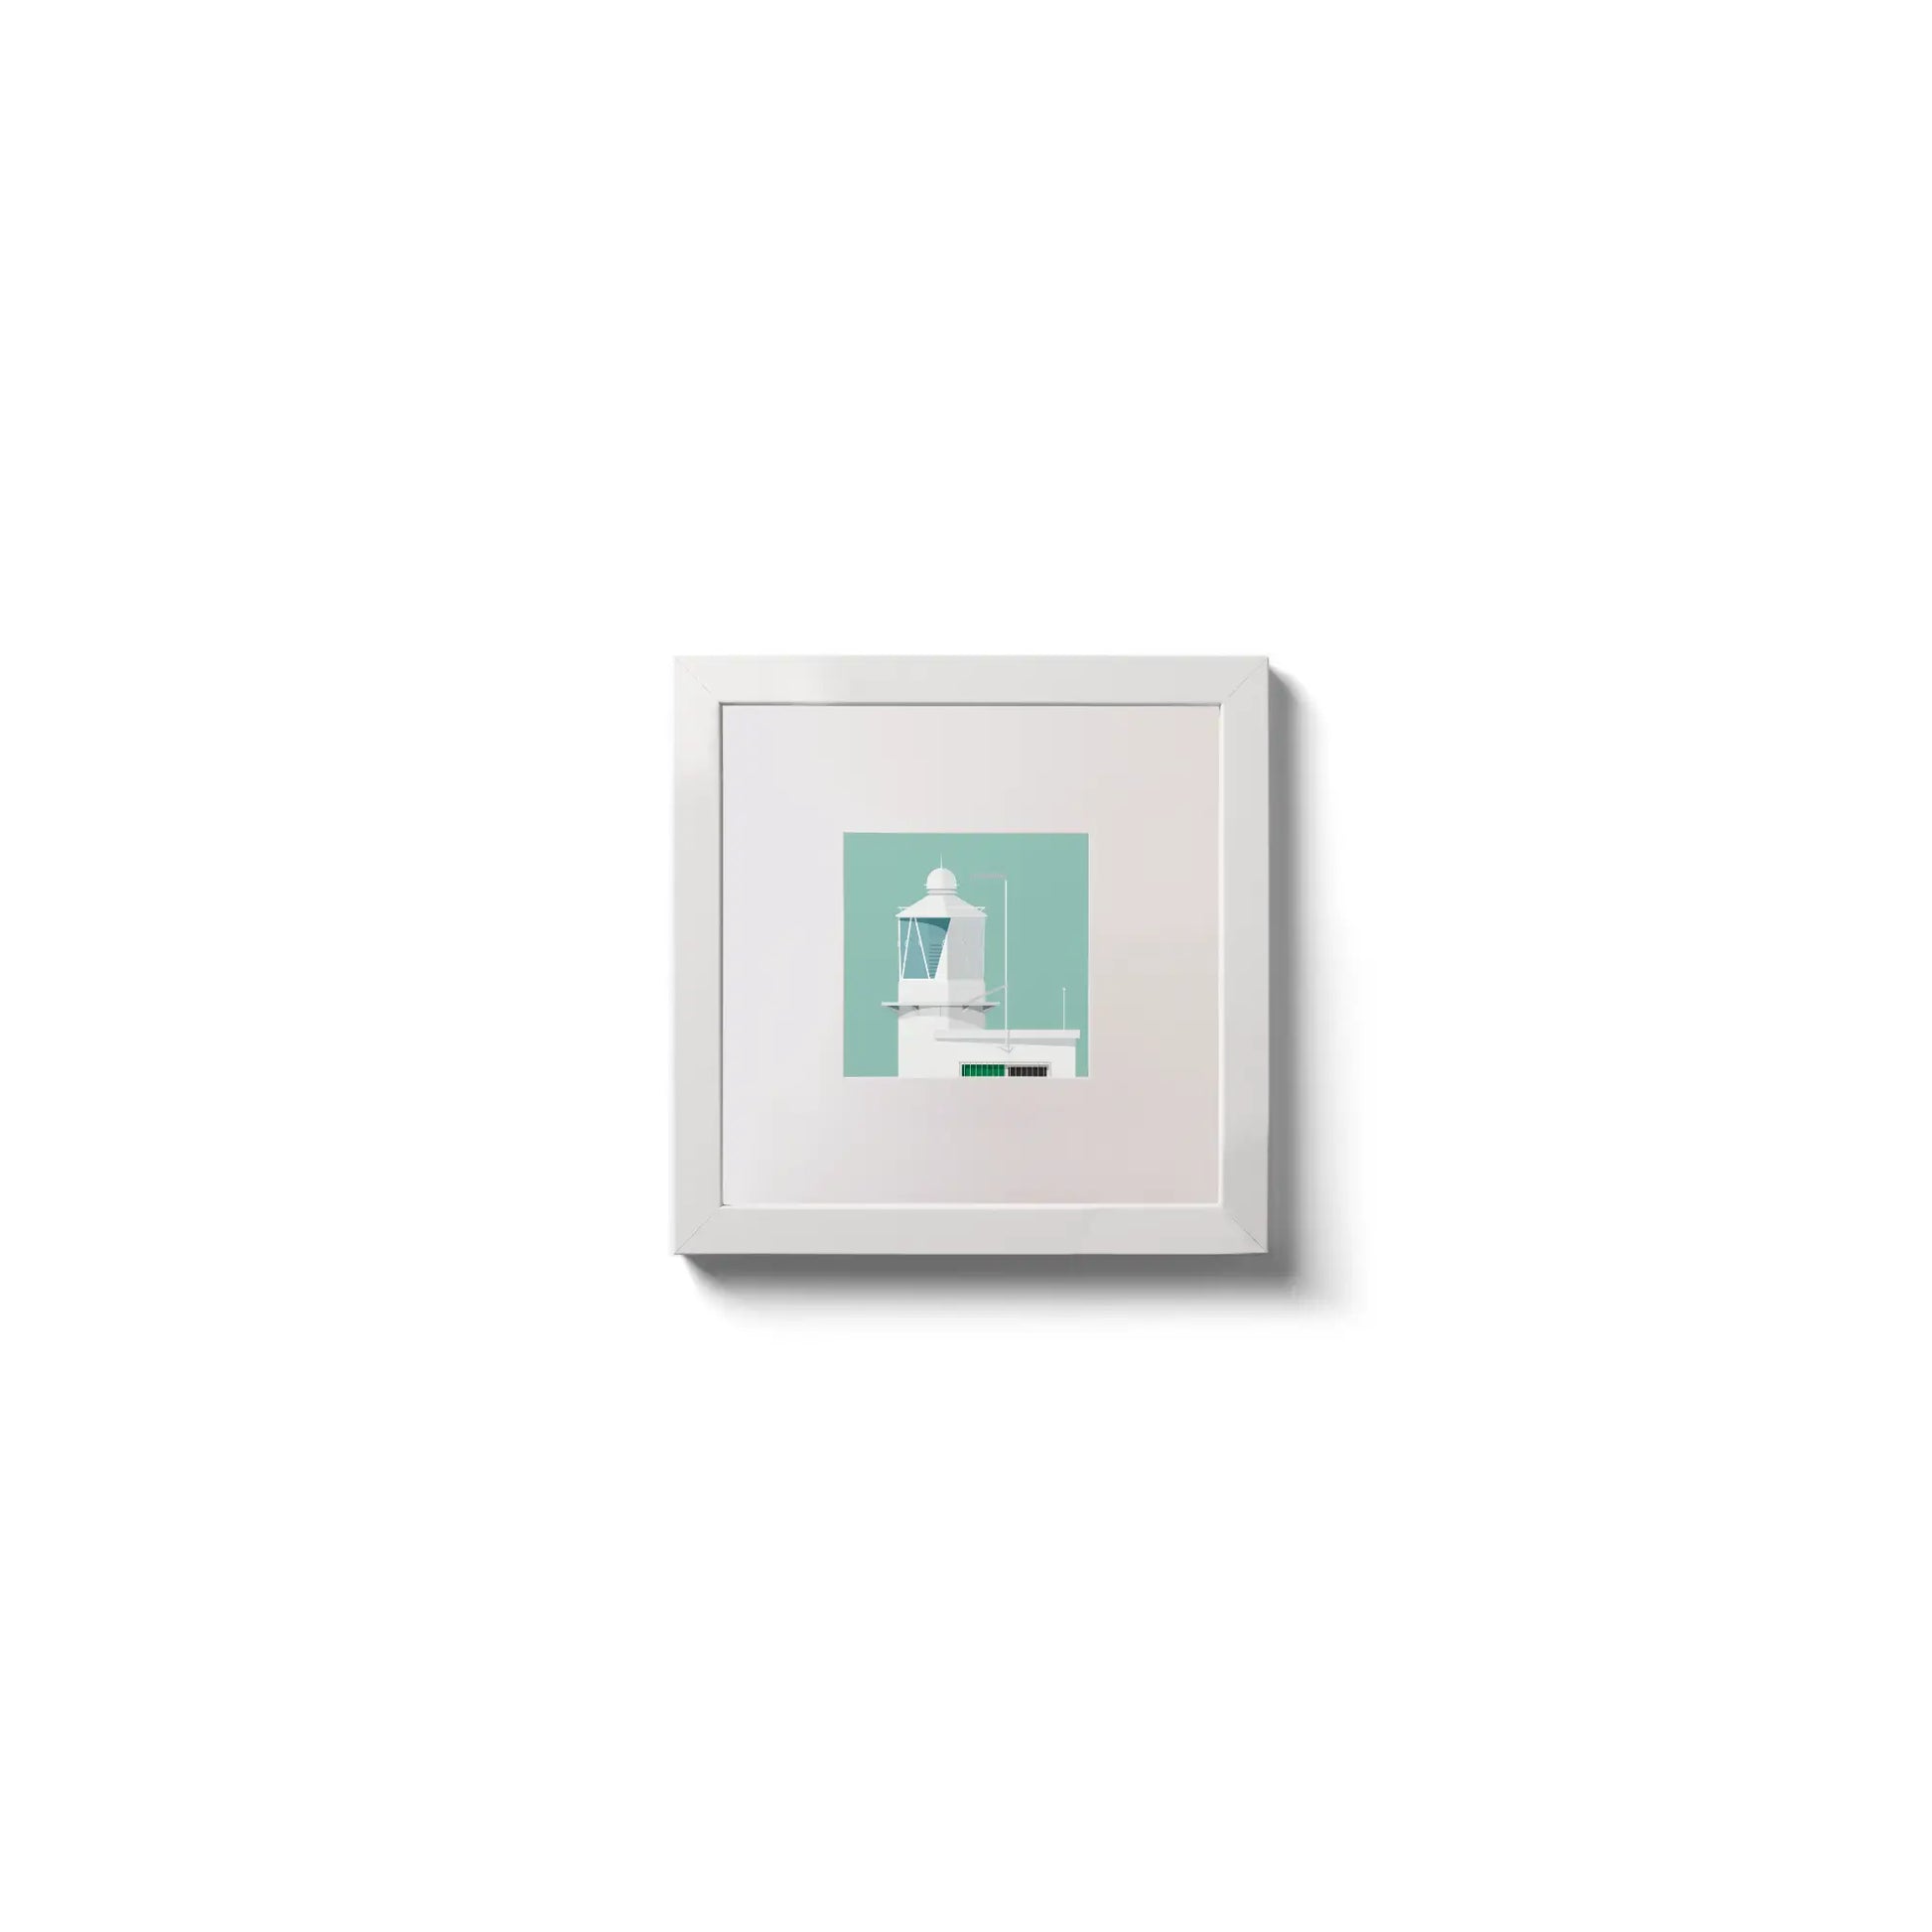 Illustration  Sheeps Head lighthouse on an ocean green background,  in a white square frame measuring 10x10cm.